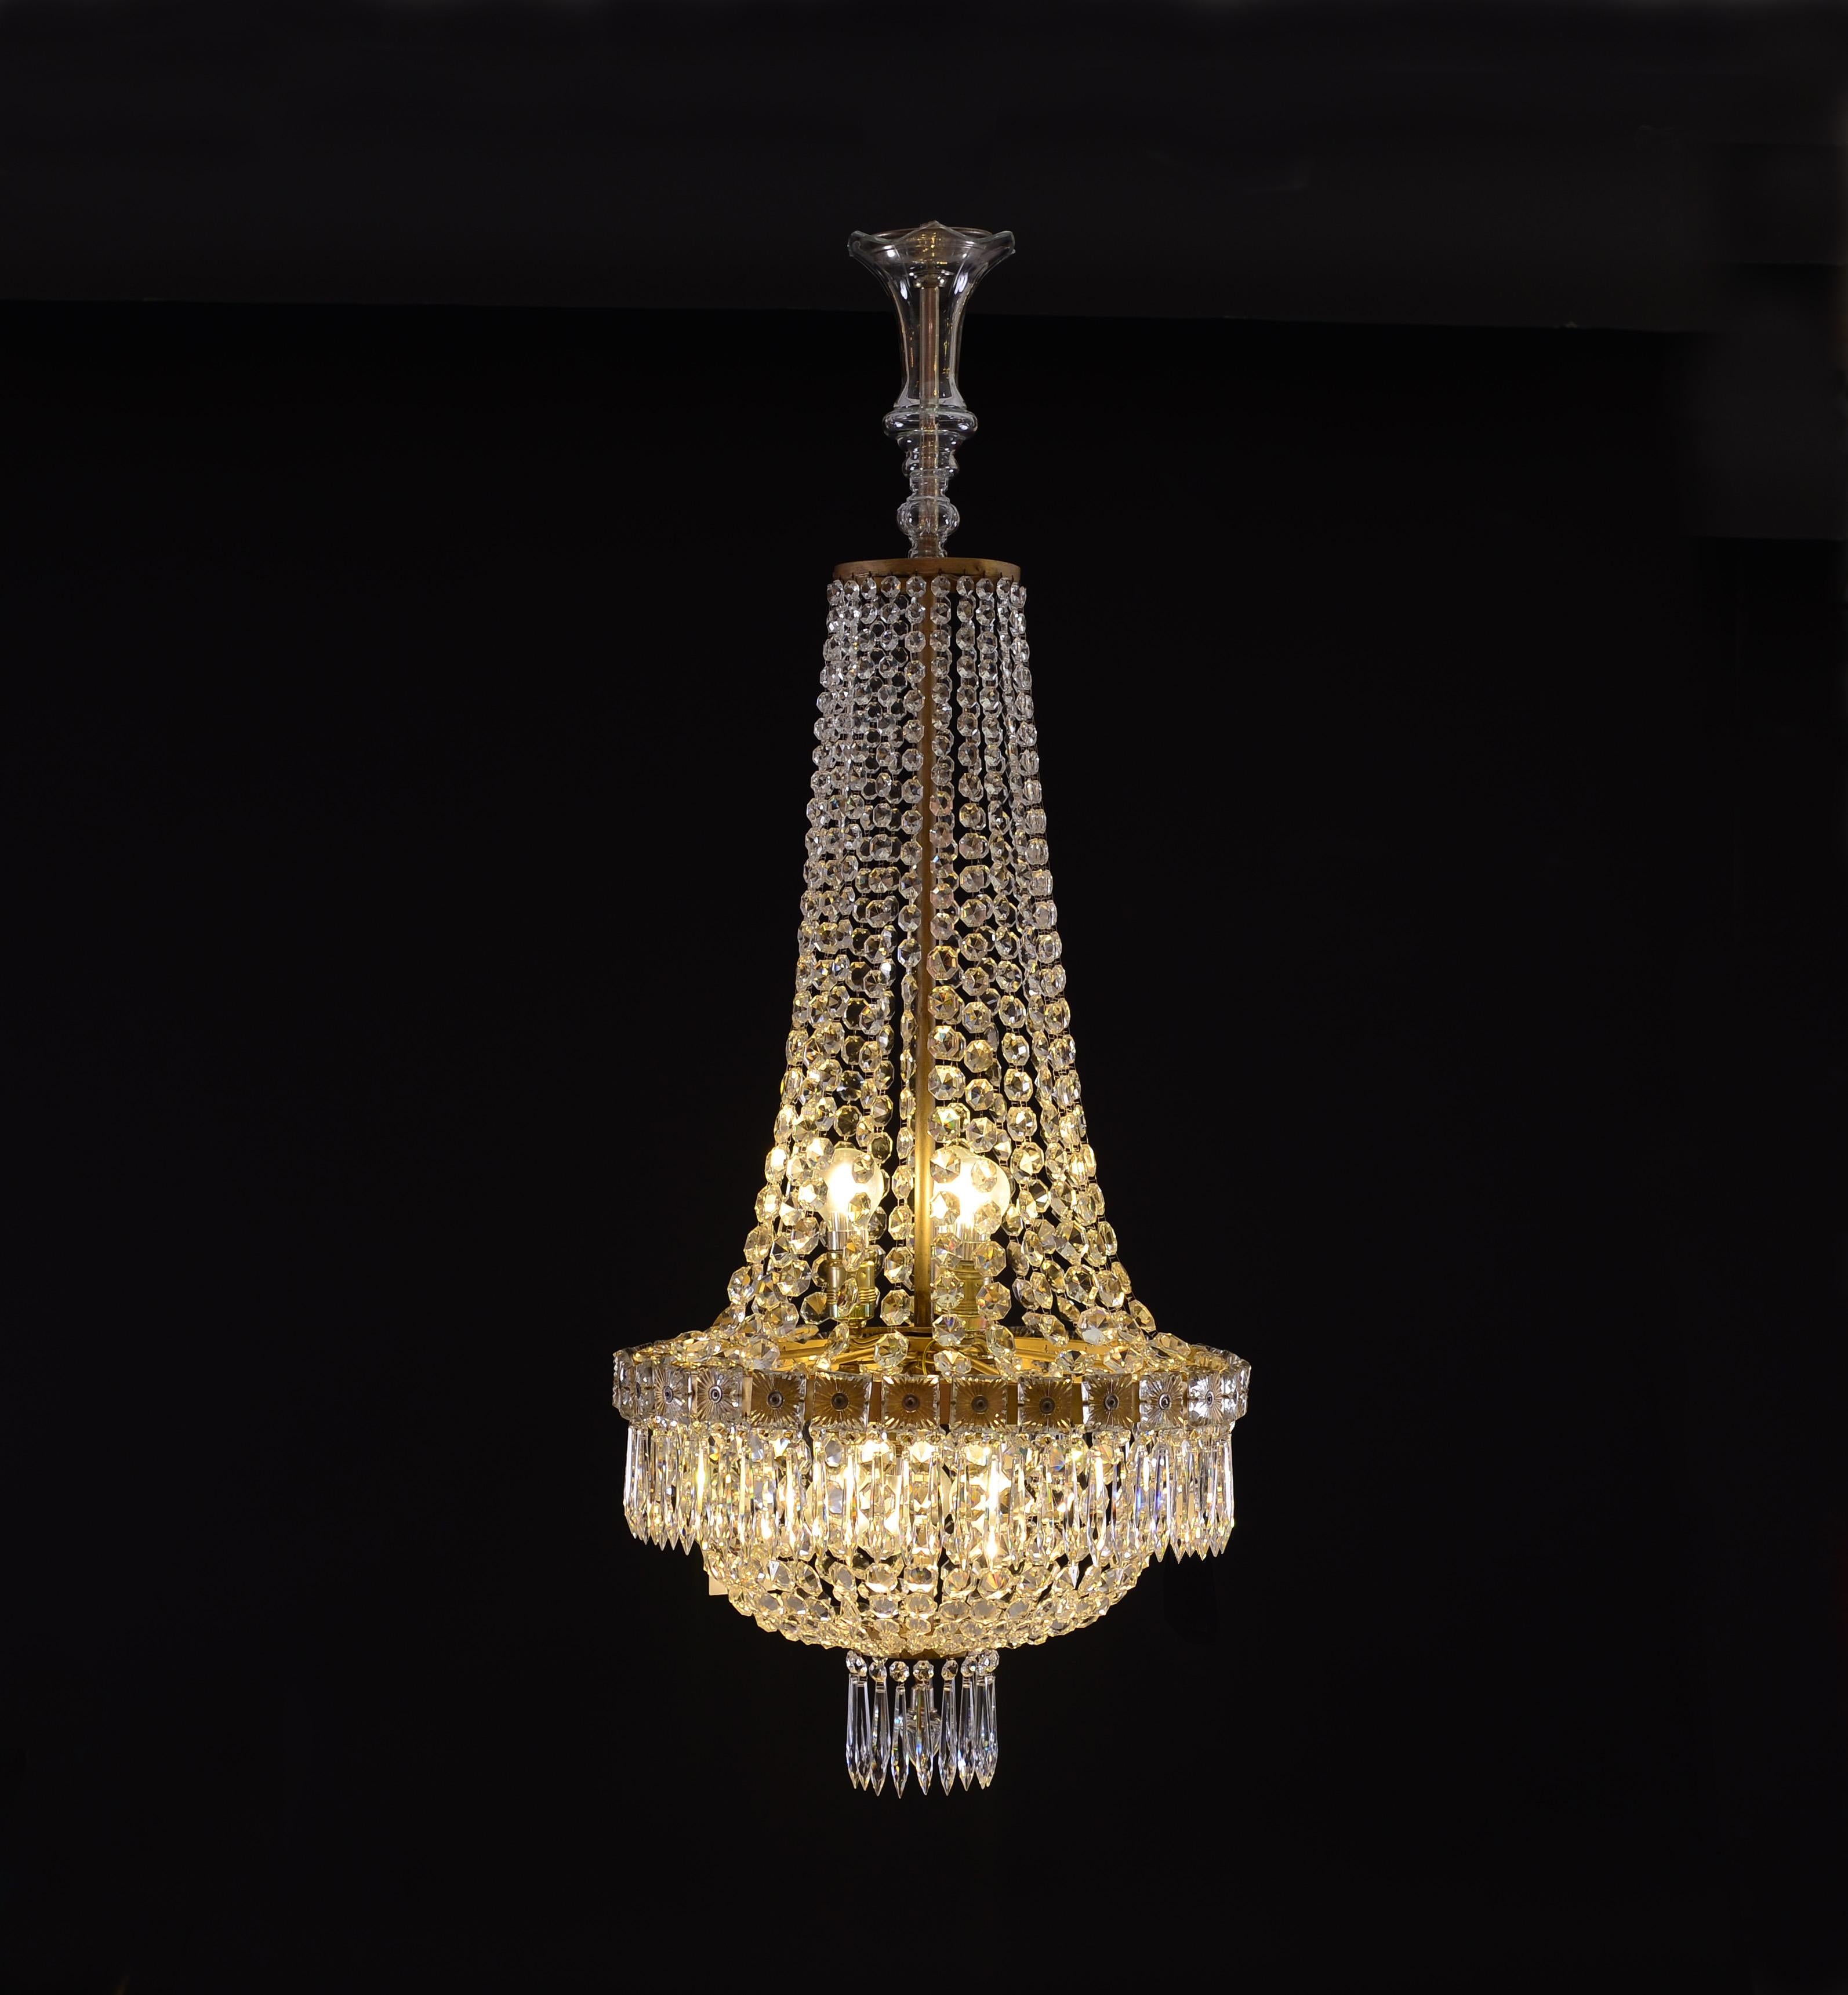 Beautiful chandelier in the Empire style from 1820, manufactured in 1920

Material:
Brass, crystal-glass

Suitable for US.